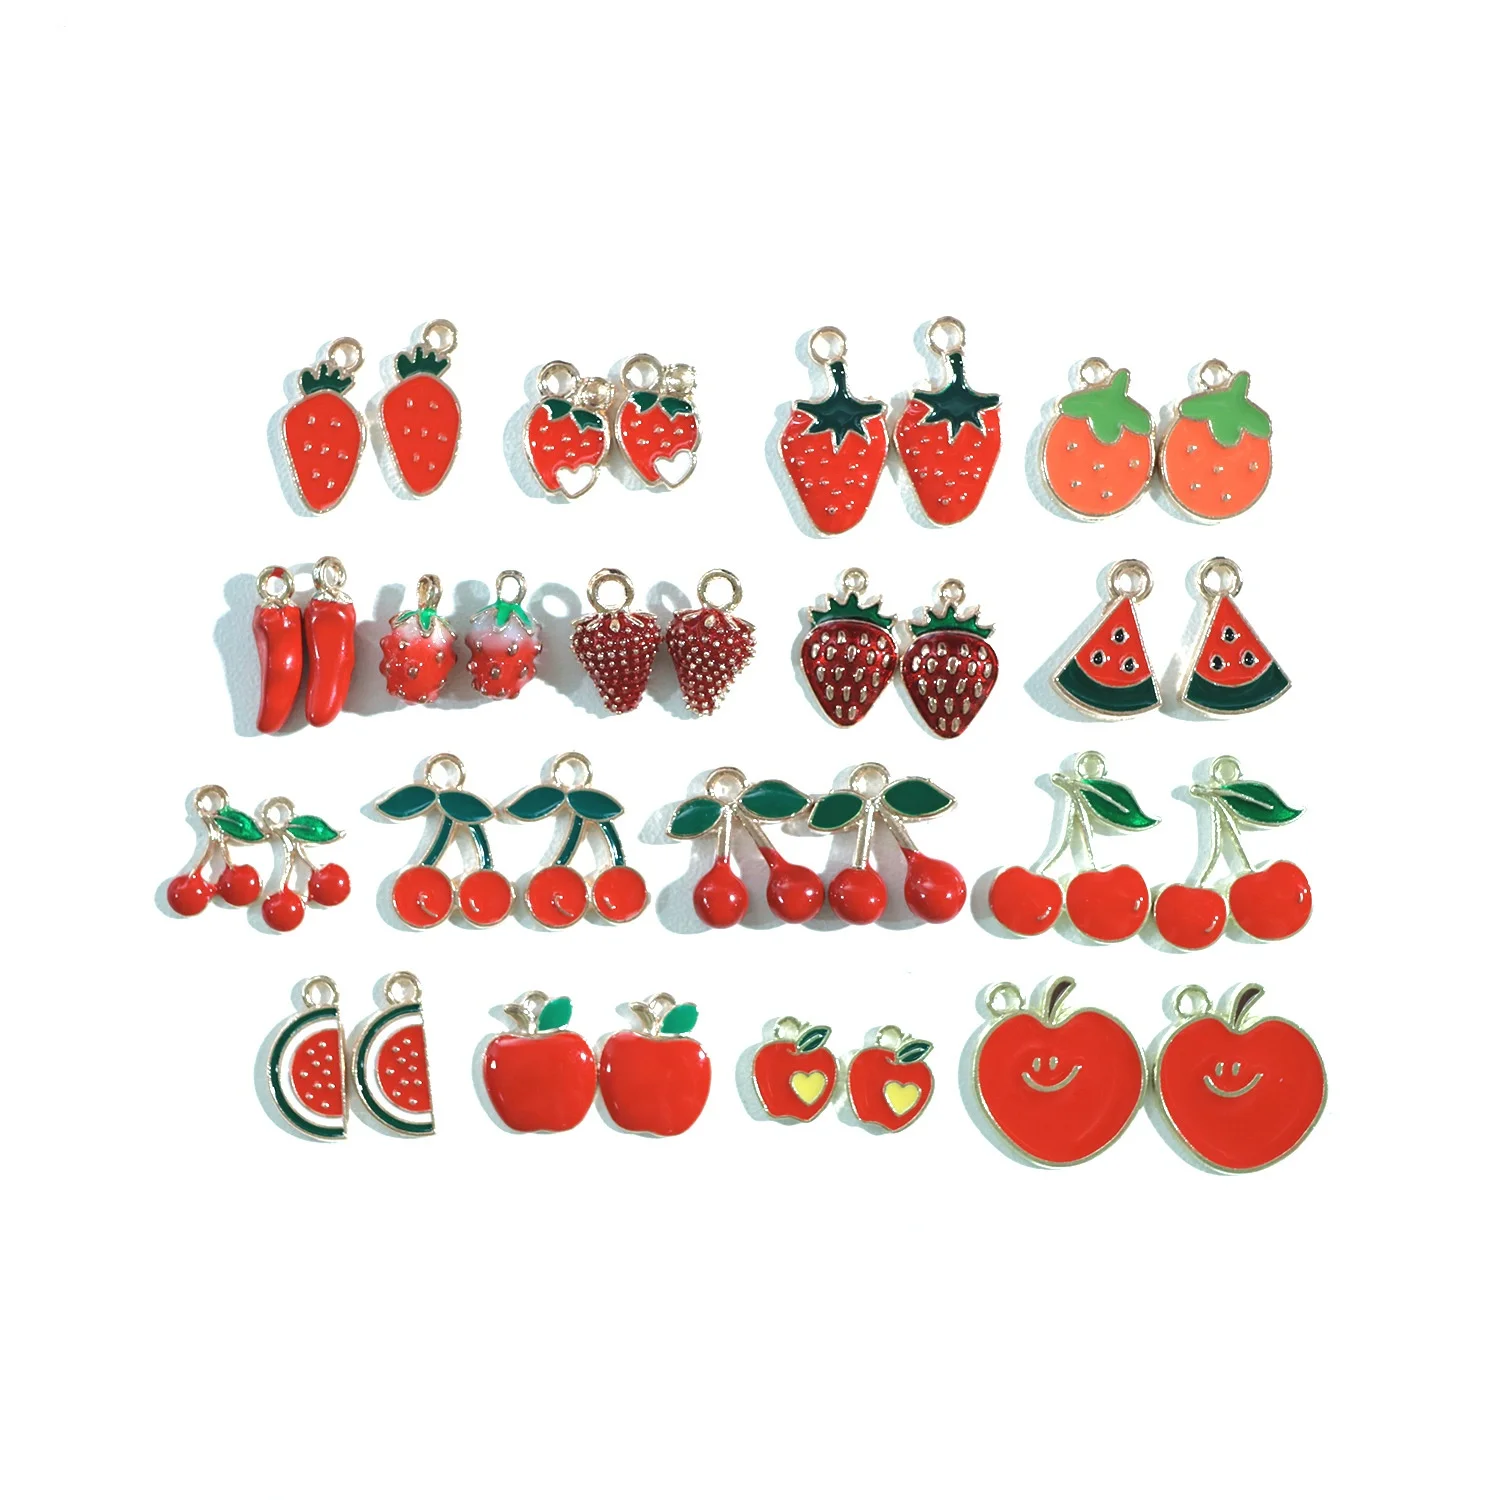 

10pcs Cute Enamel Red Fruits Charms for Earrings Apple Strawberry Watermelon Cherry Charms Pendants for DIY Jewelry Making